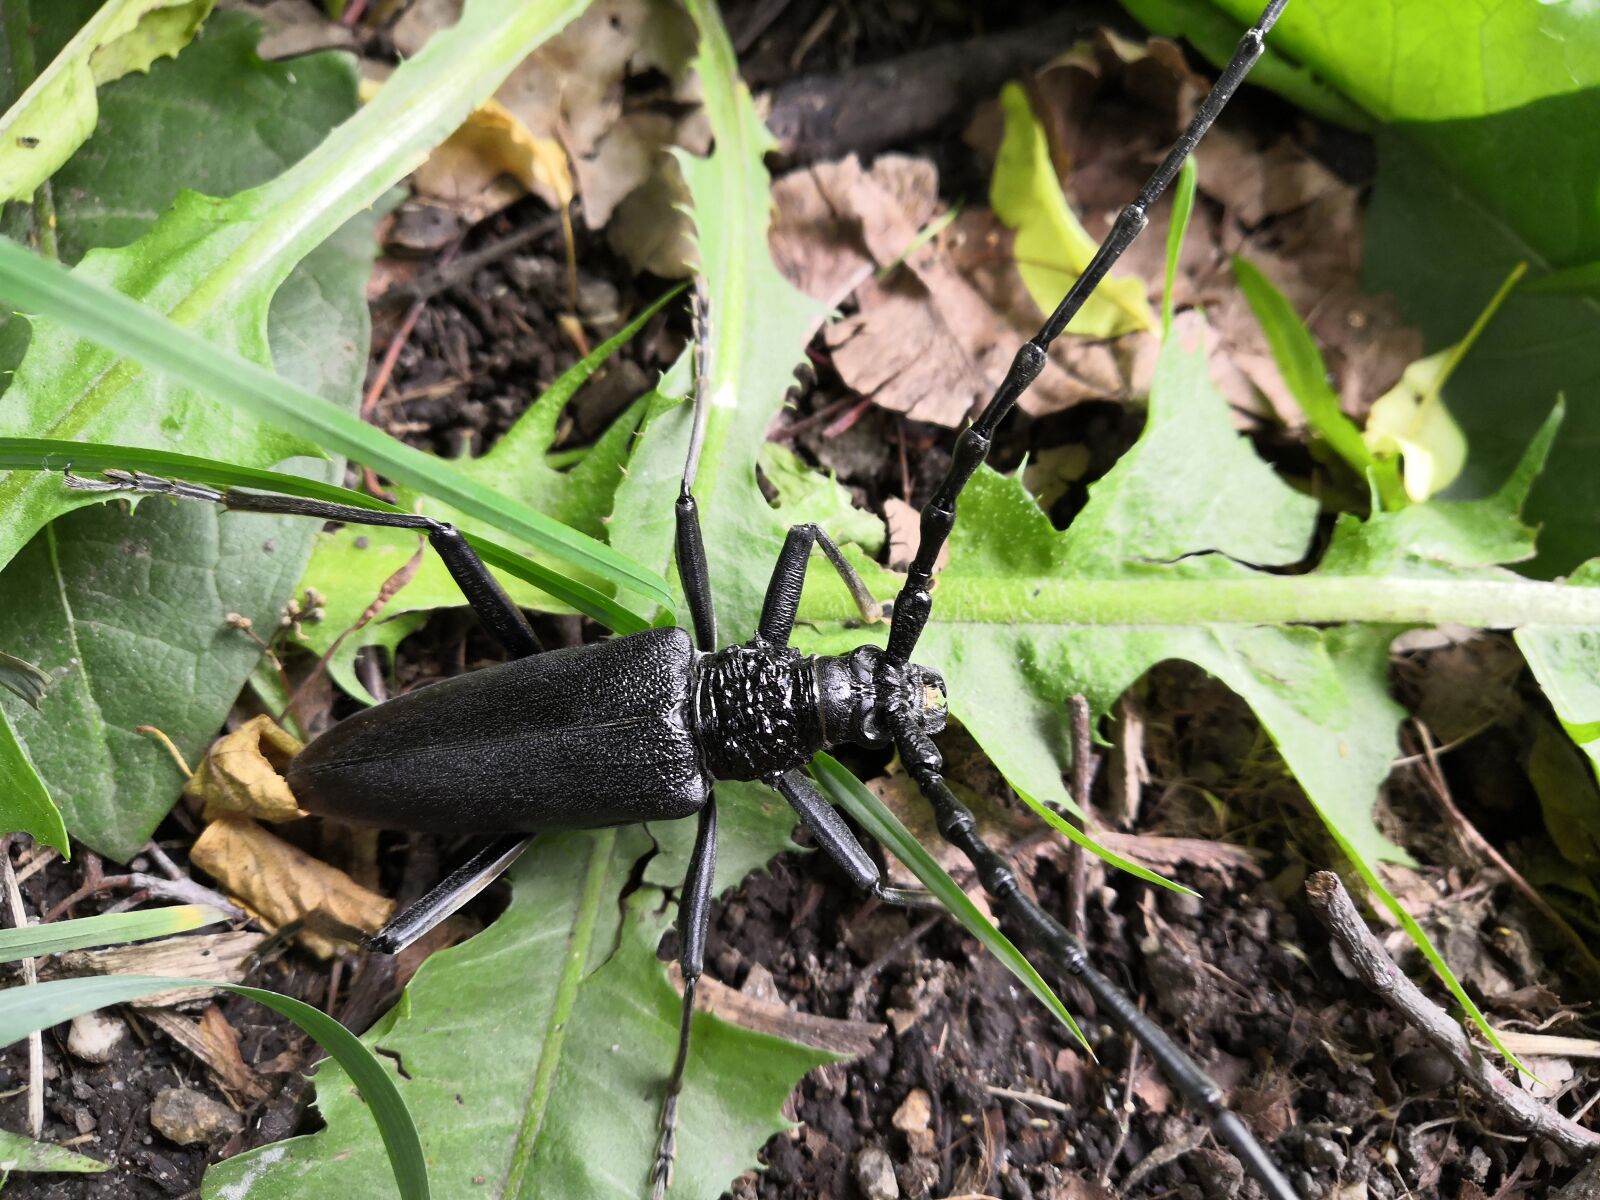 HUAWEI Honor 10 sample photo. Insect, the beetle, nature photography